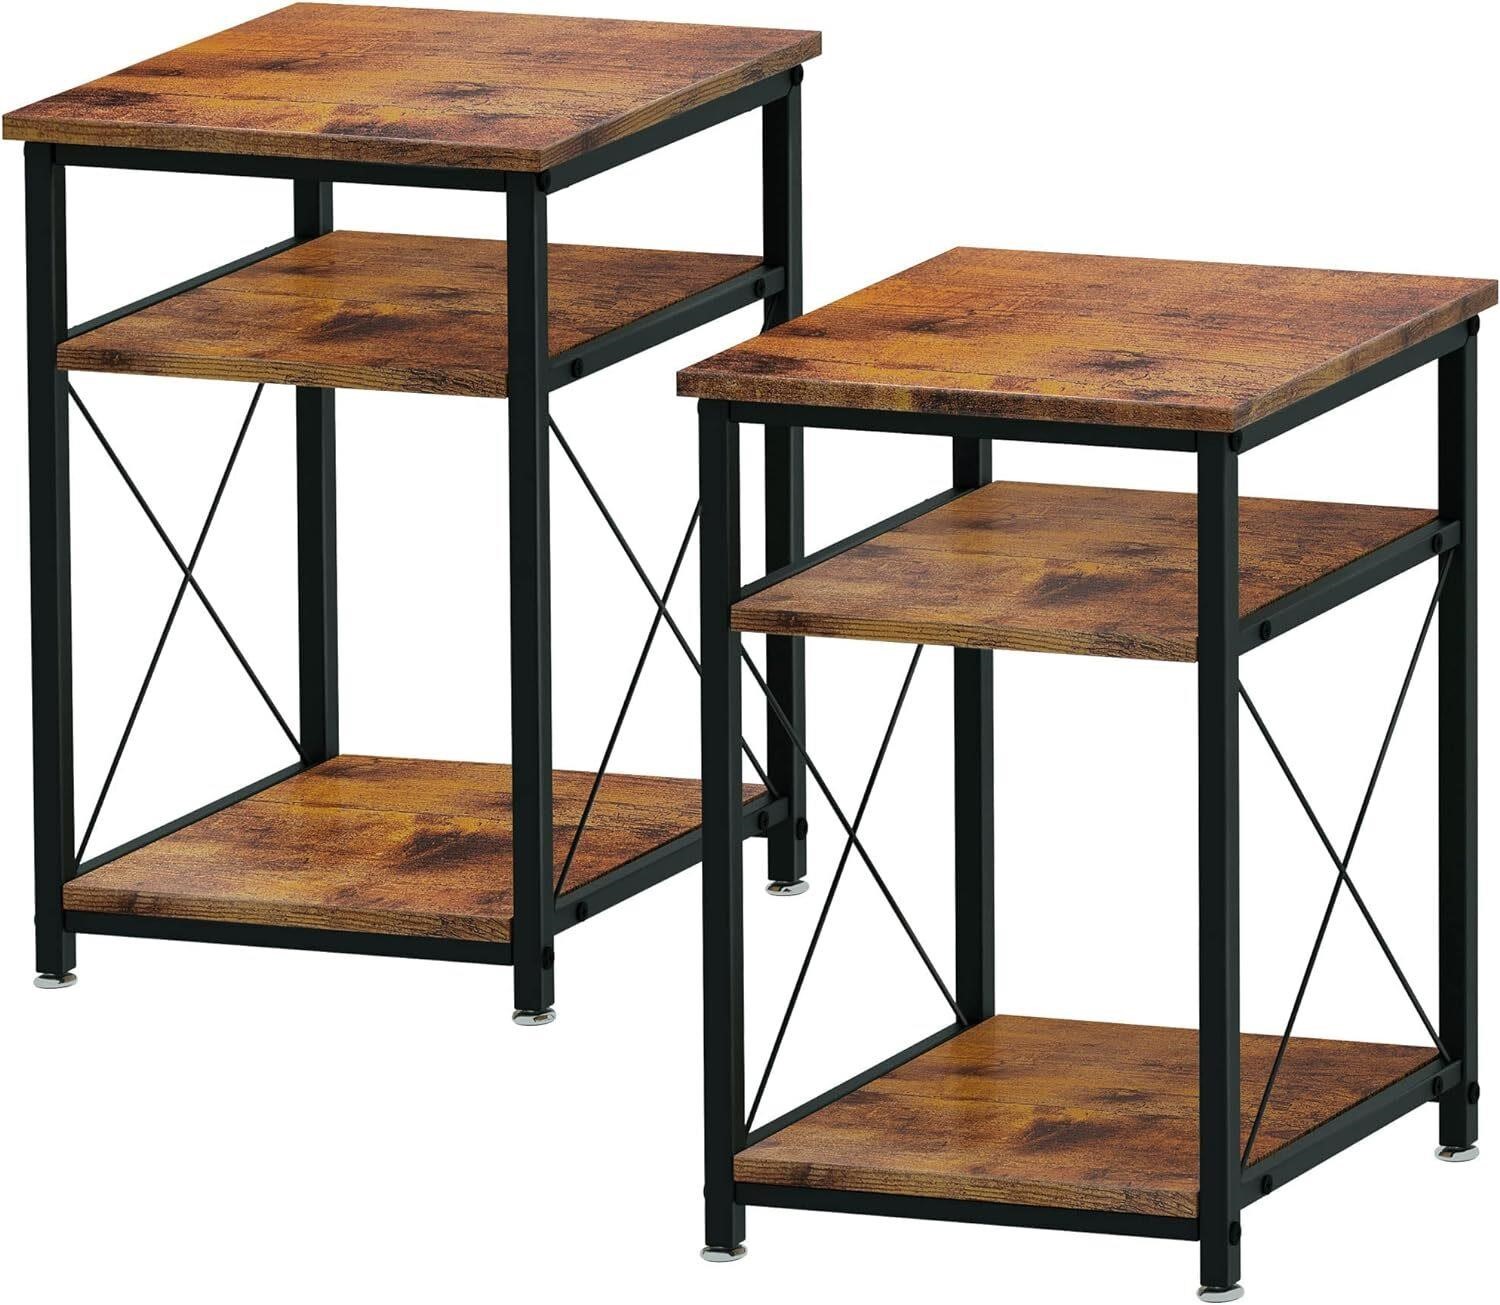 Set-of-2 Nightstands with Storage  Rustic